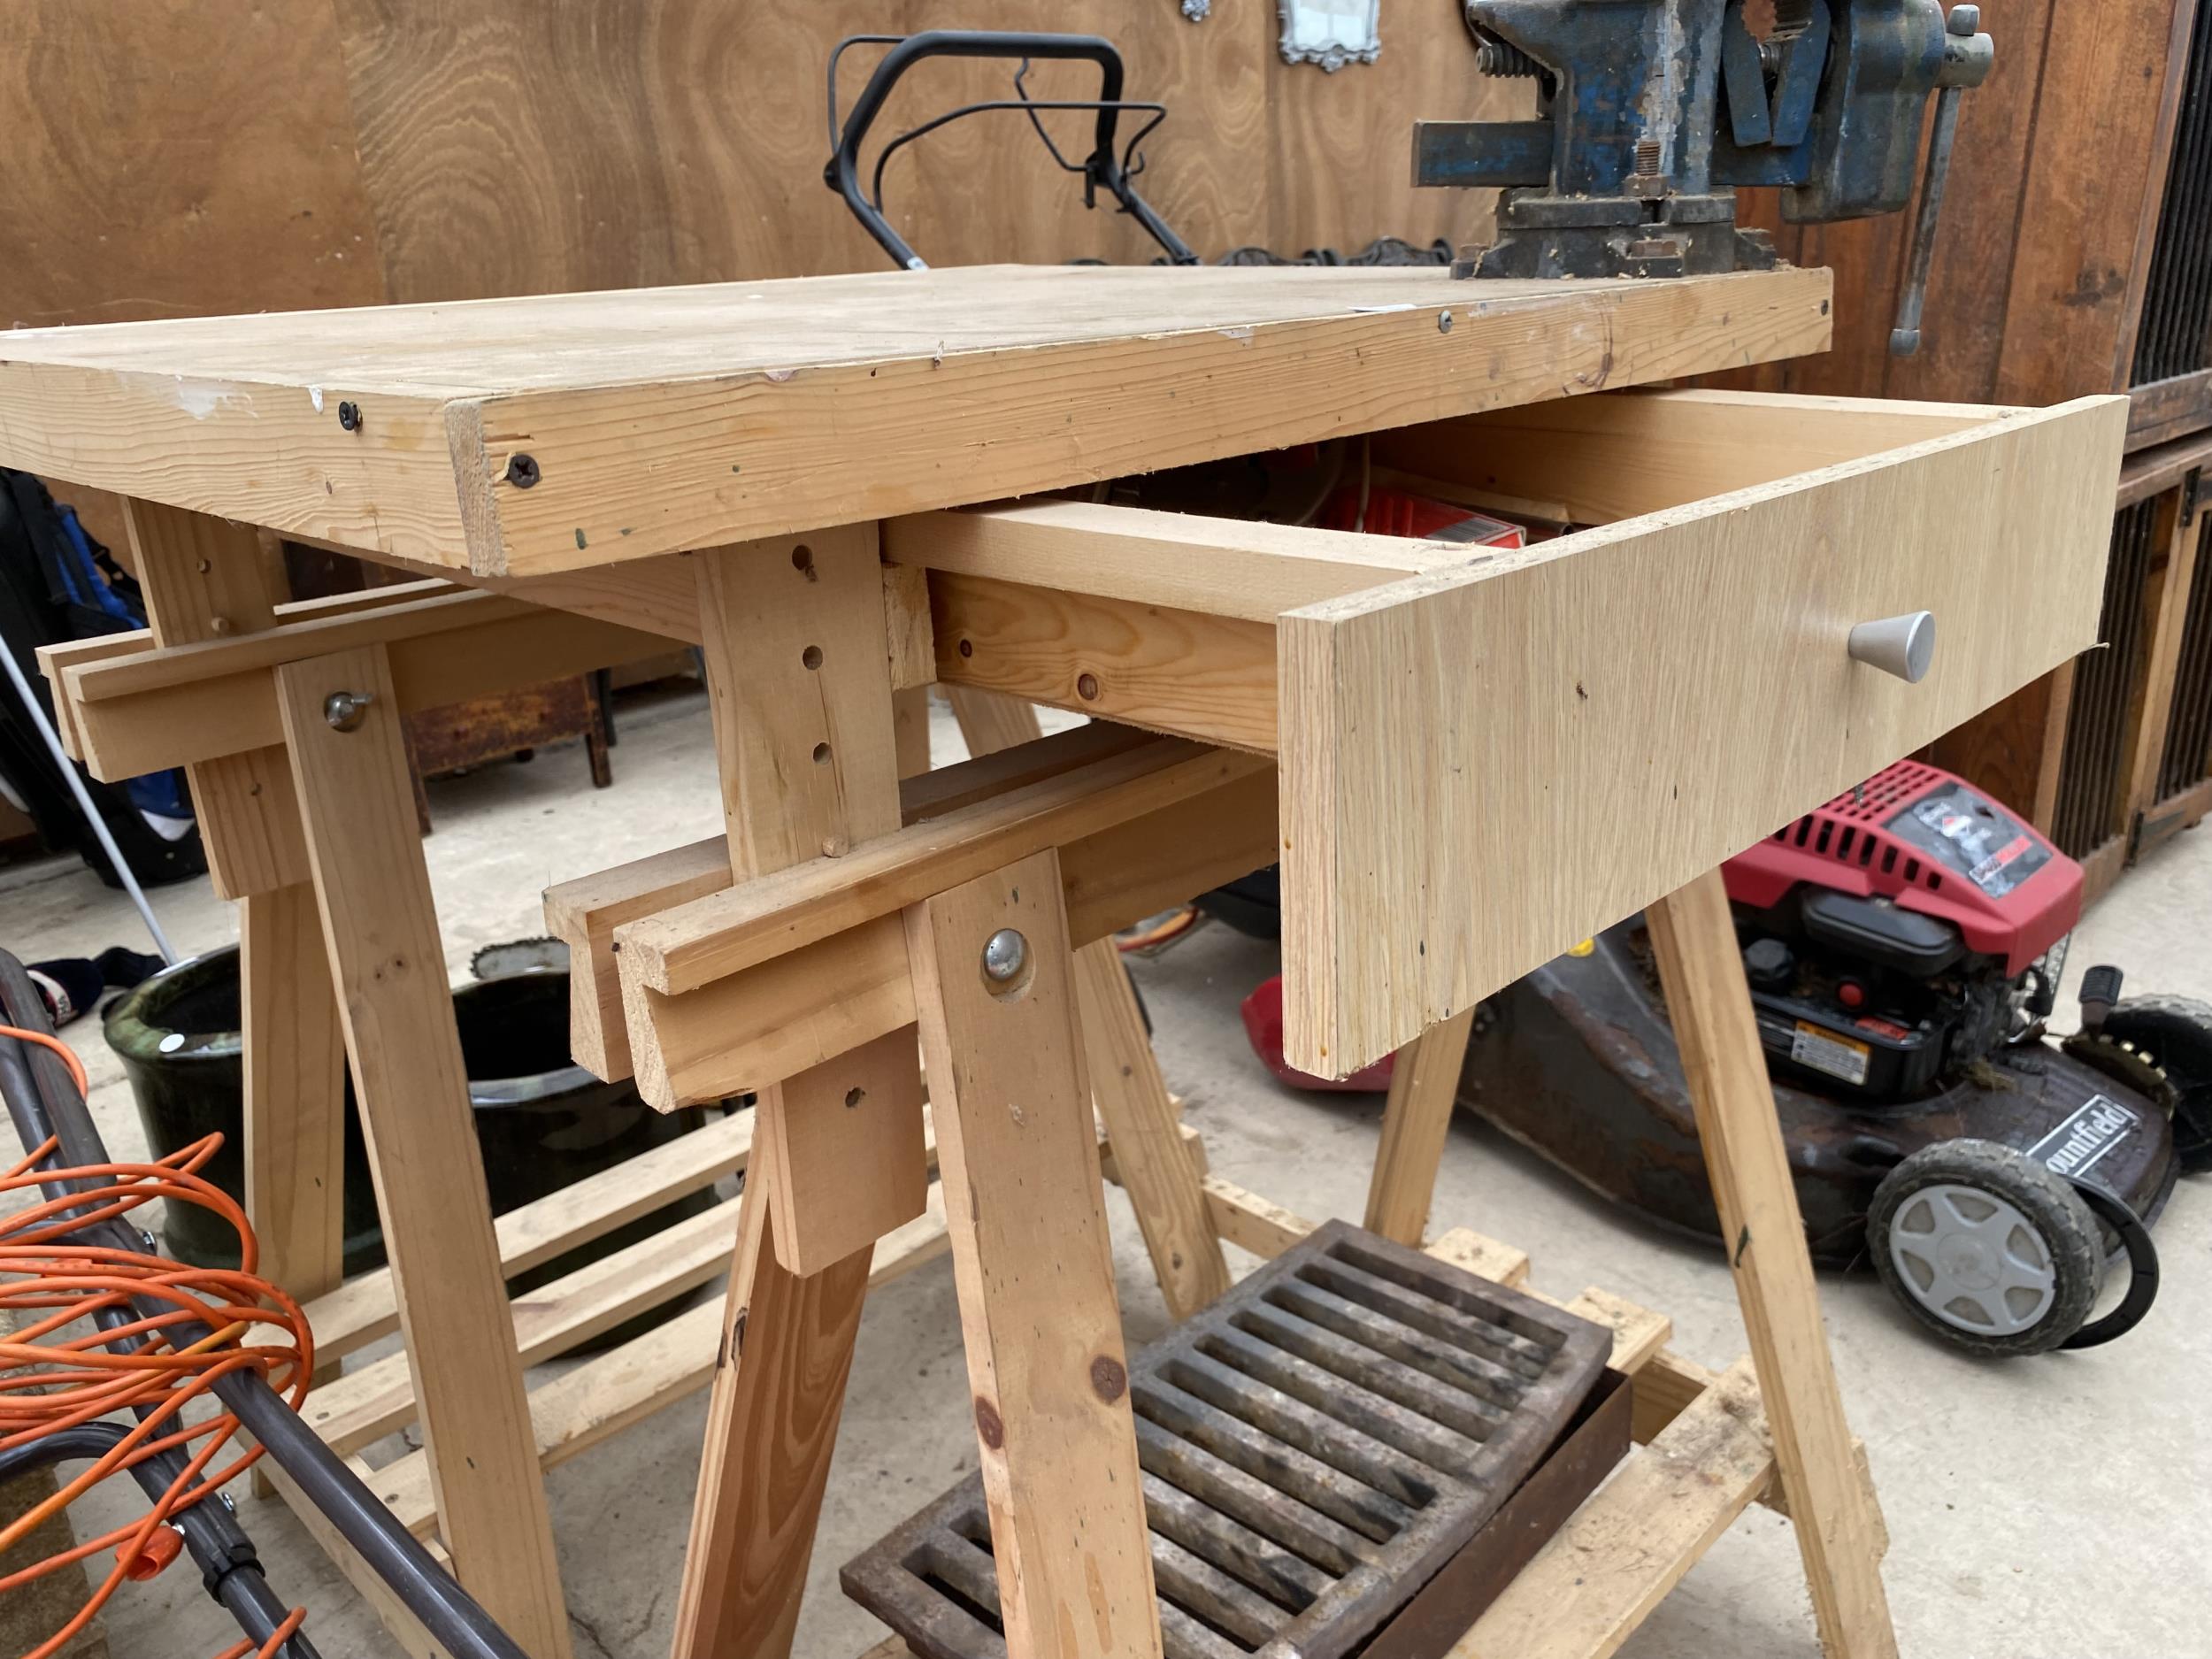 A WOODEN WORK BENCH WITH A BENCH VICE - Image 4 of 4